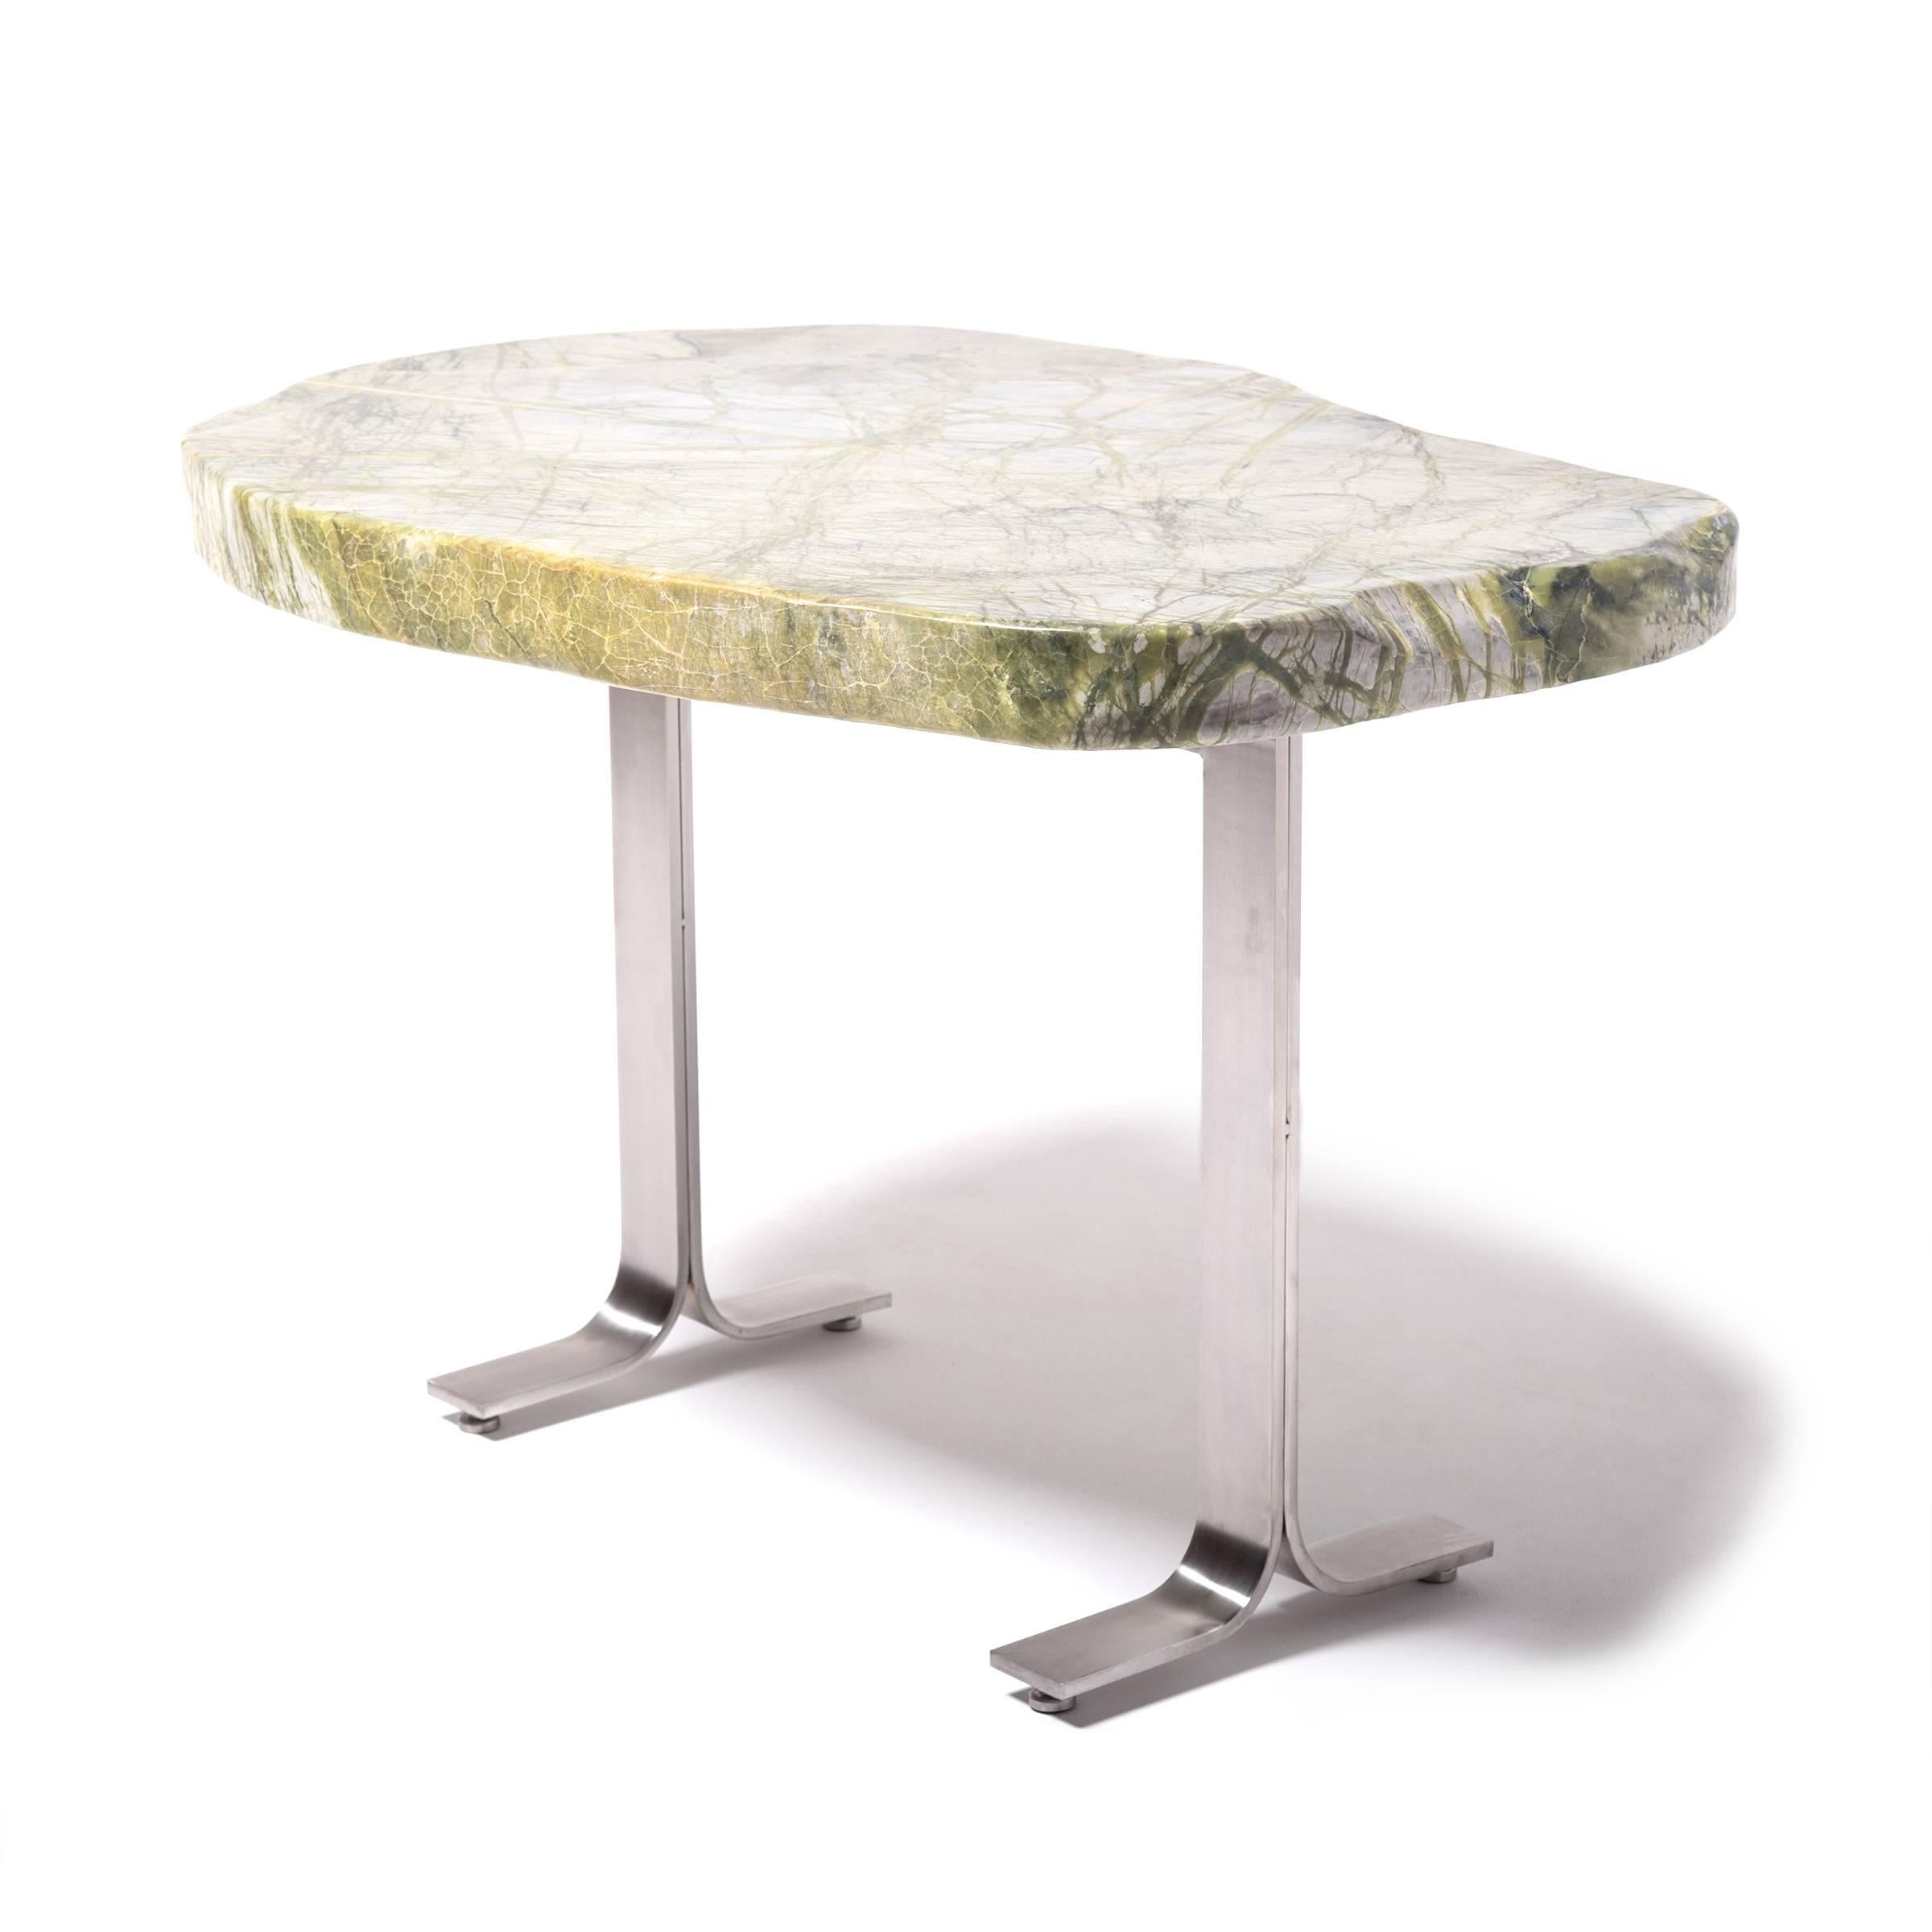 Prized by ancient scholars, meditation stones invigorated the imaginations of poets, painters, and calligraphers. The abstract shape and veining of the greenery stone that tops this table is a unique composition of jadeite, moss agate, serpentine,